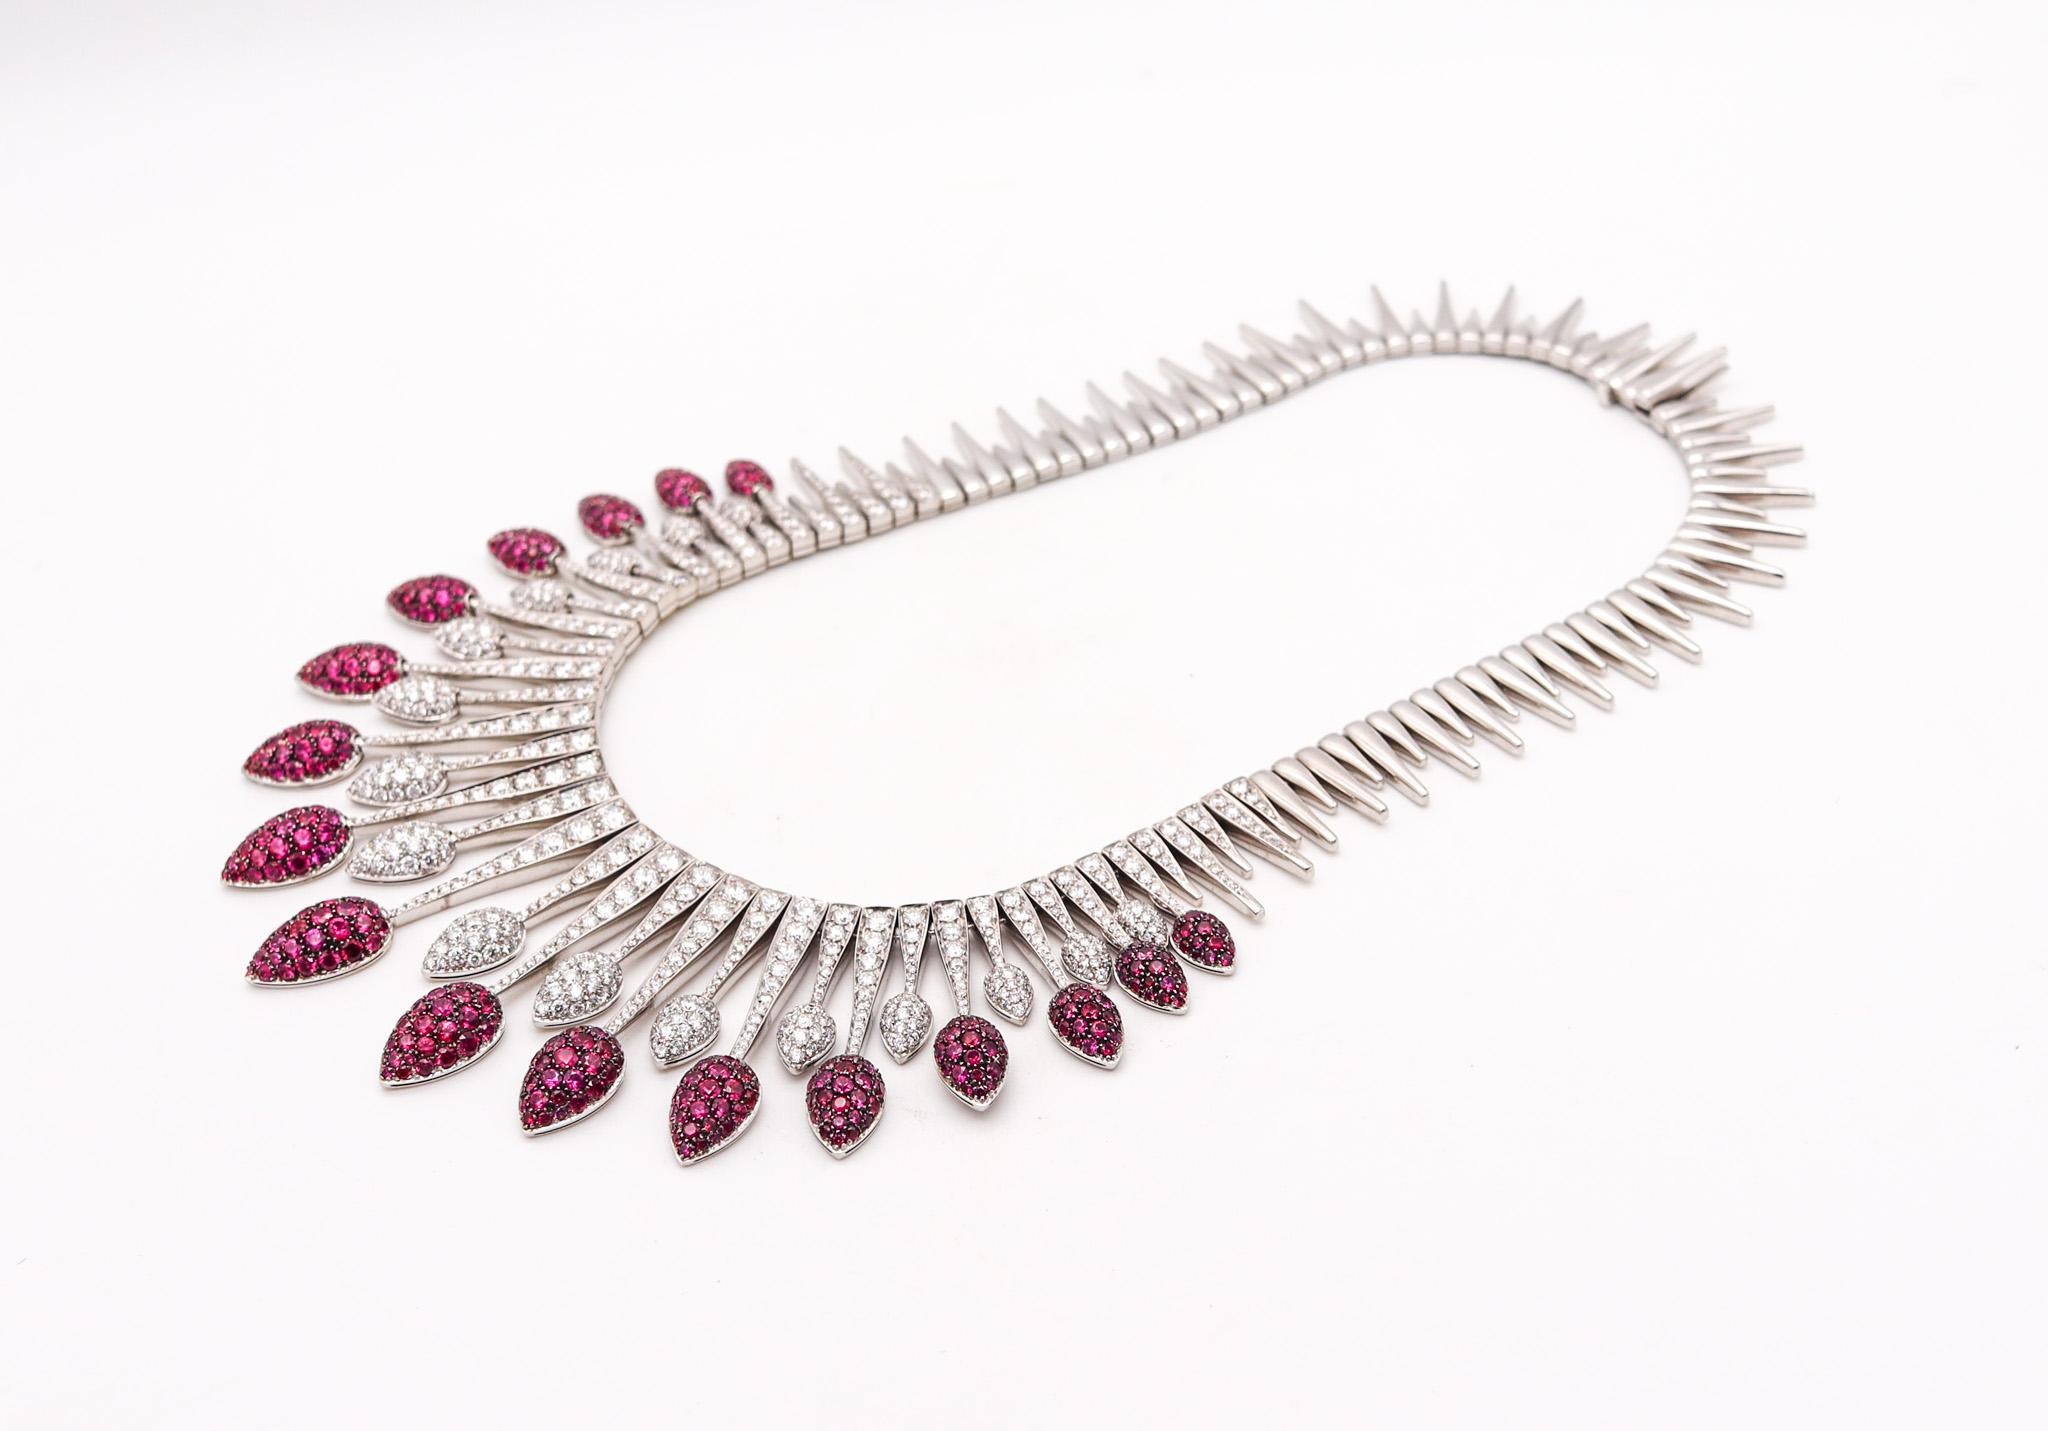 Modern Picchiotti Festoon Necklace In 18Kt Gold With 40.21 Ctw In Diamonds And Rubies For Sale